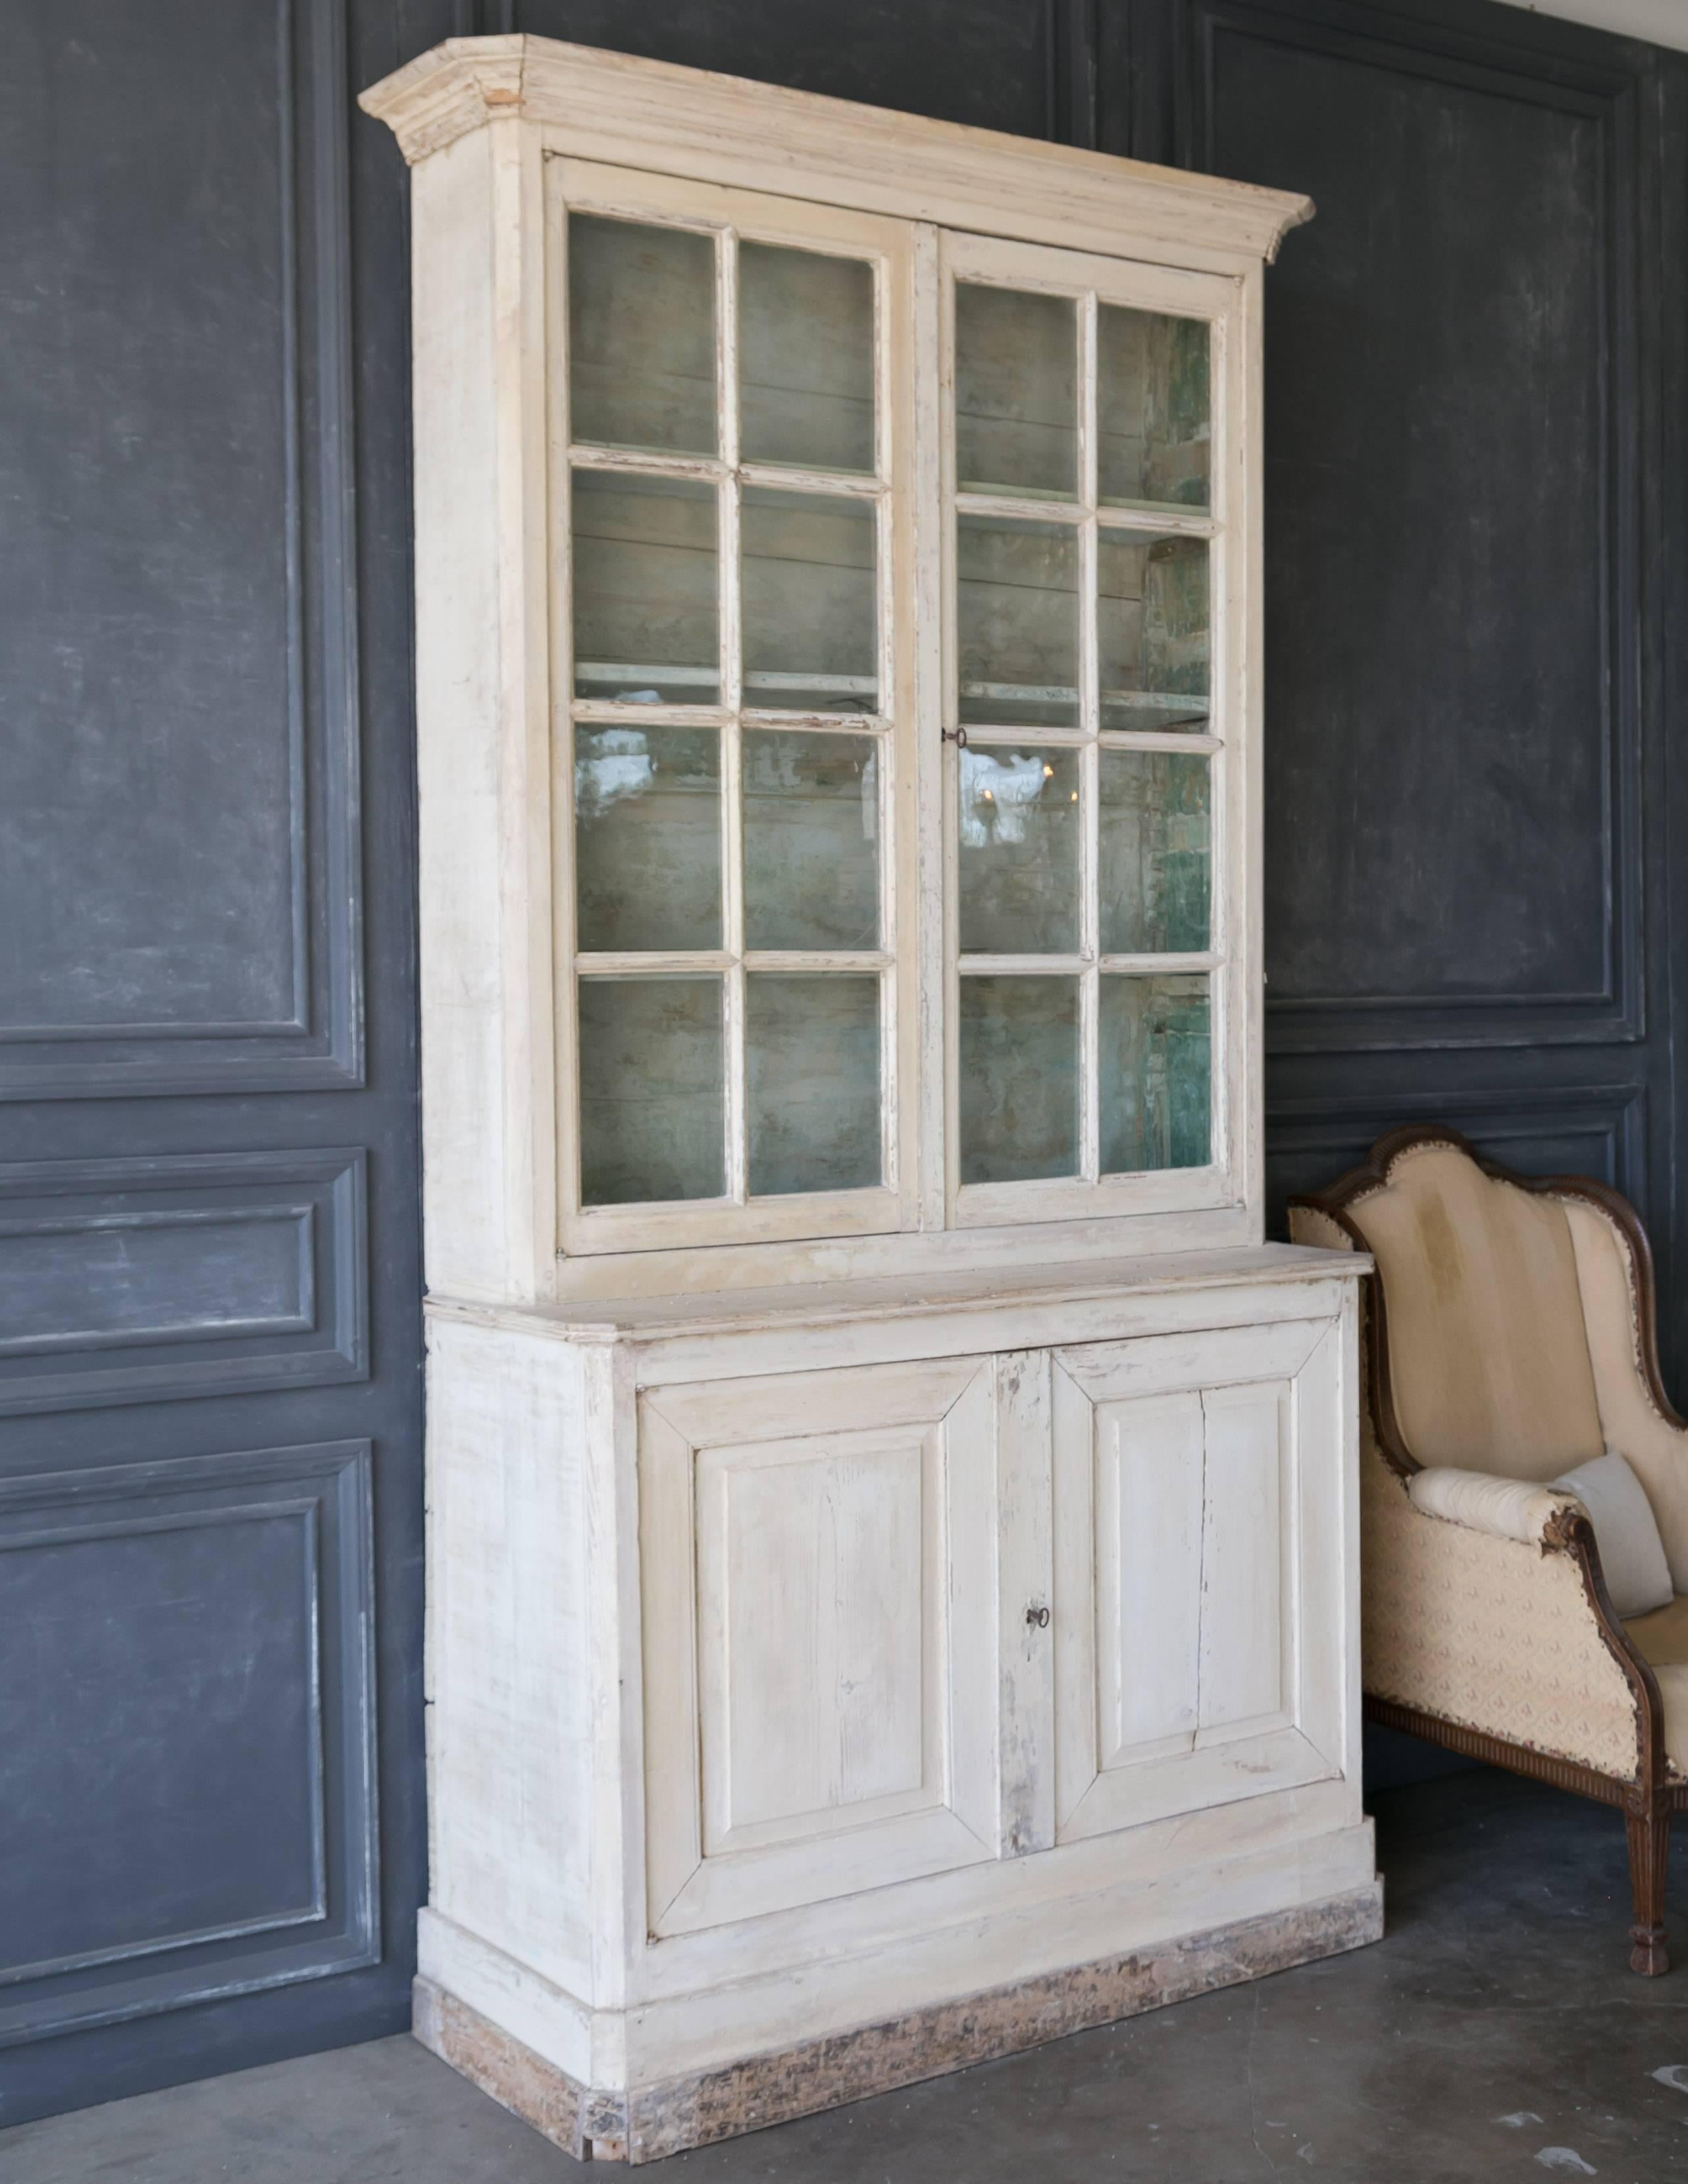 Dazzling antique French cabinet in pine with distressed ivory finish exterior and original aqua green interior. Three narrow shelves in the glass display part and one shelf behind the doors. This tall cabinet has a crown molding and functional keys